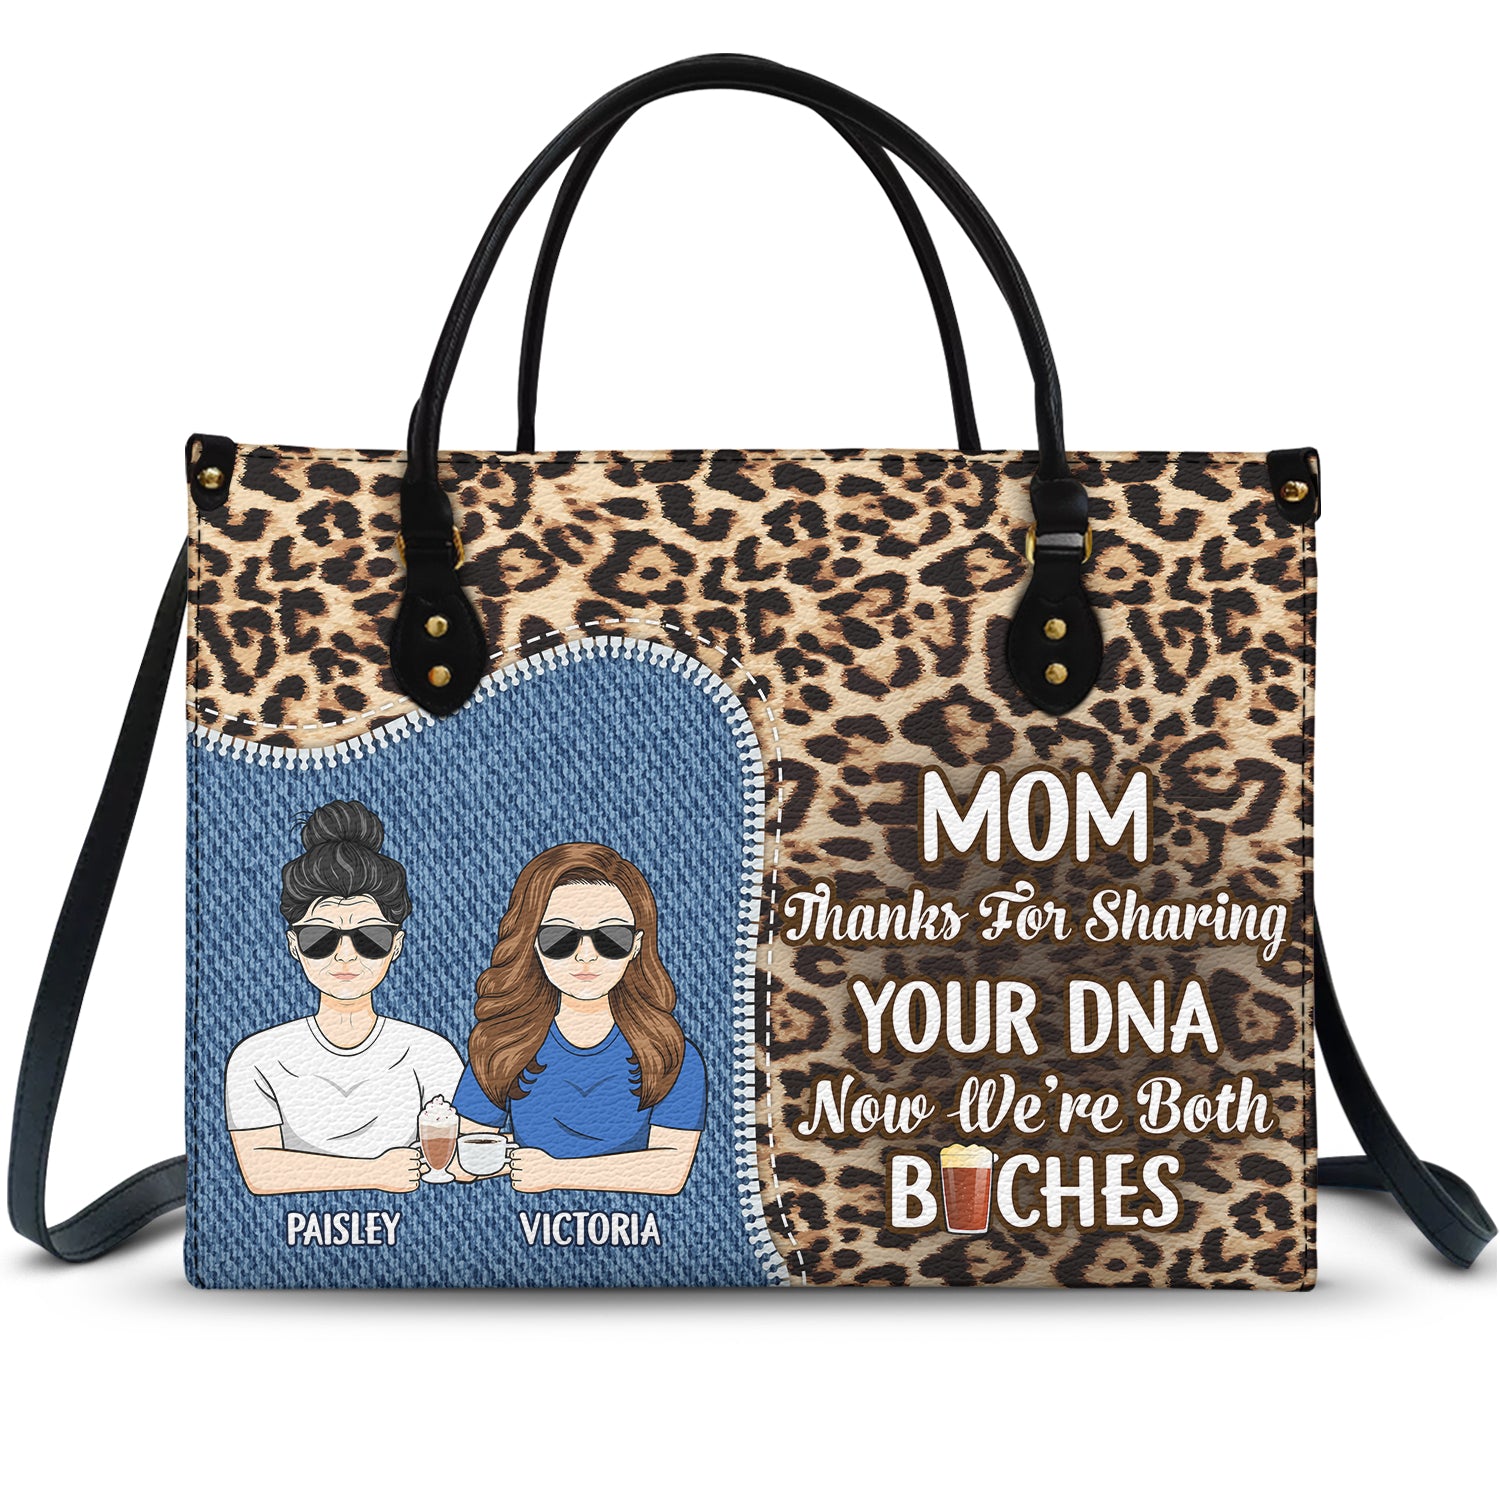 Mom Thanks For Sharing Your DNA - Mother Gift - Personalized Leather Bag